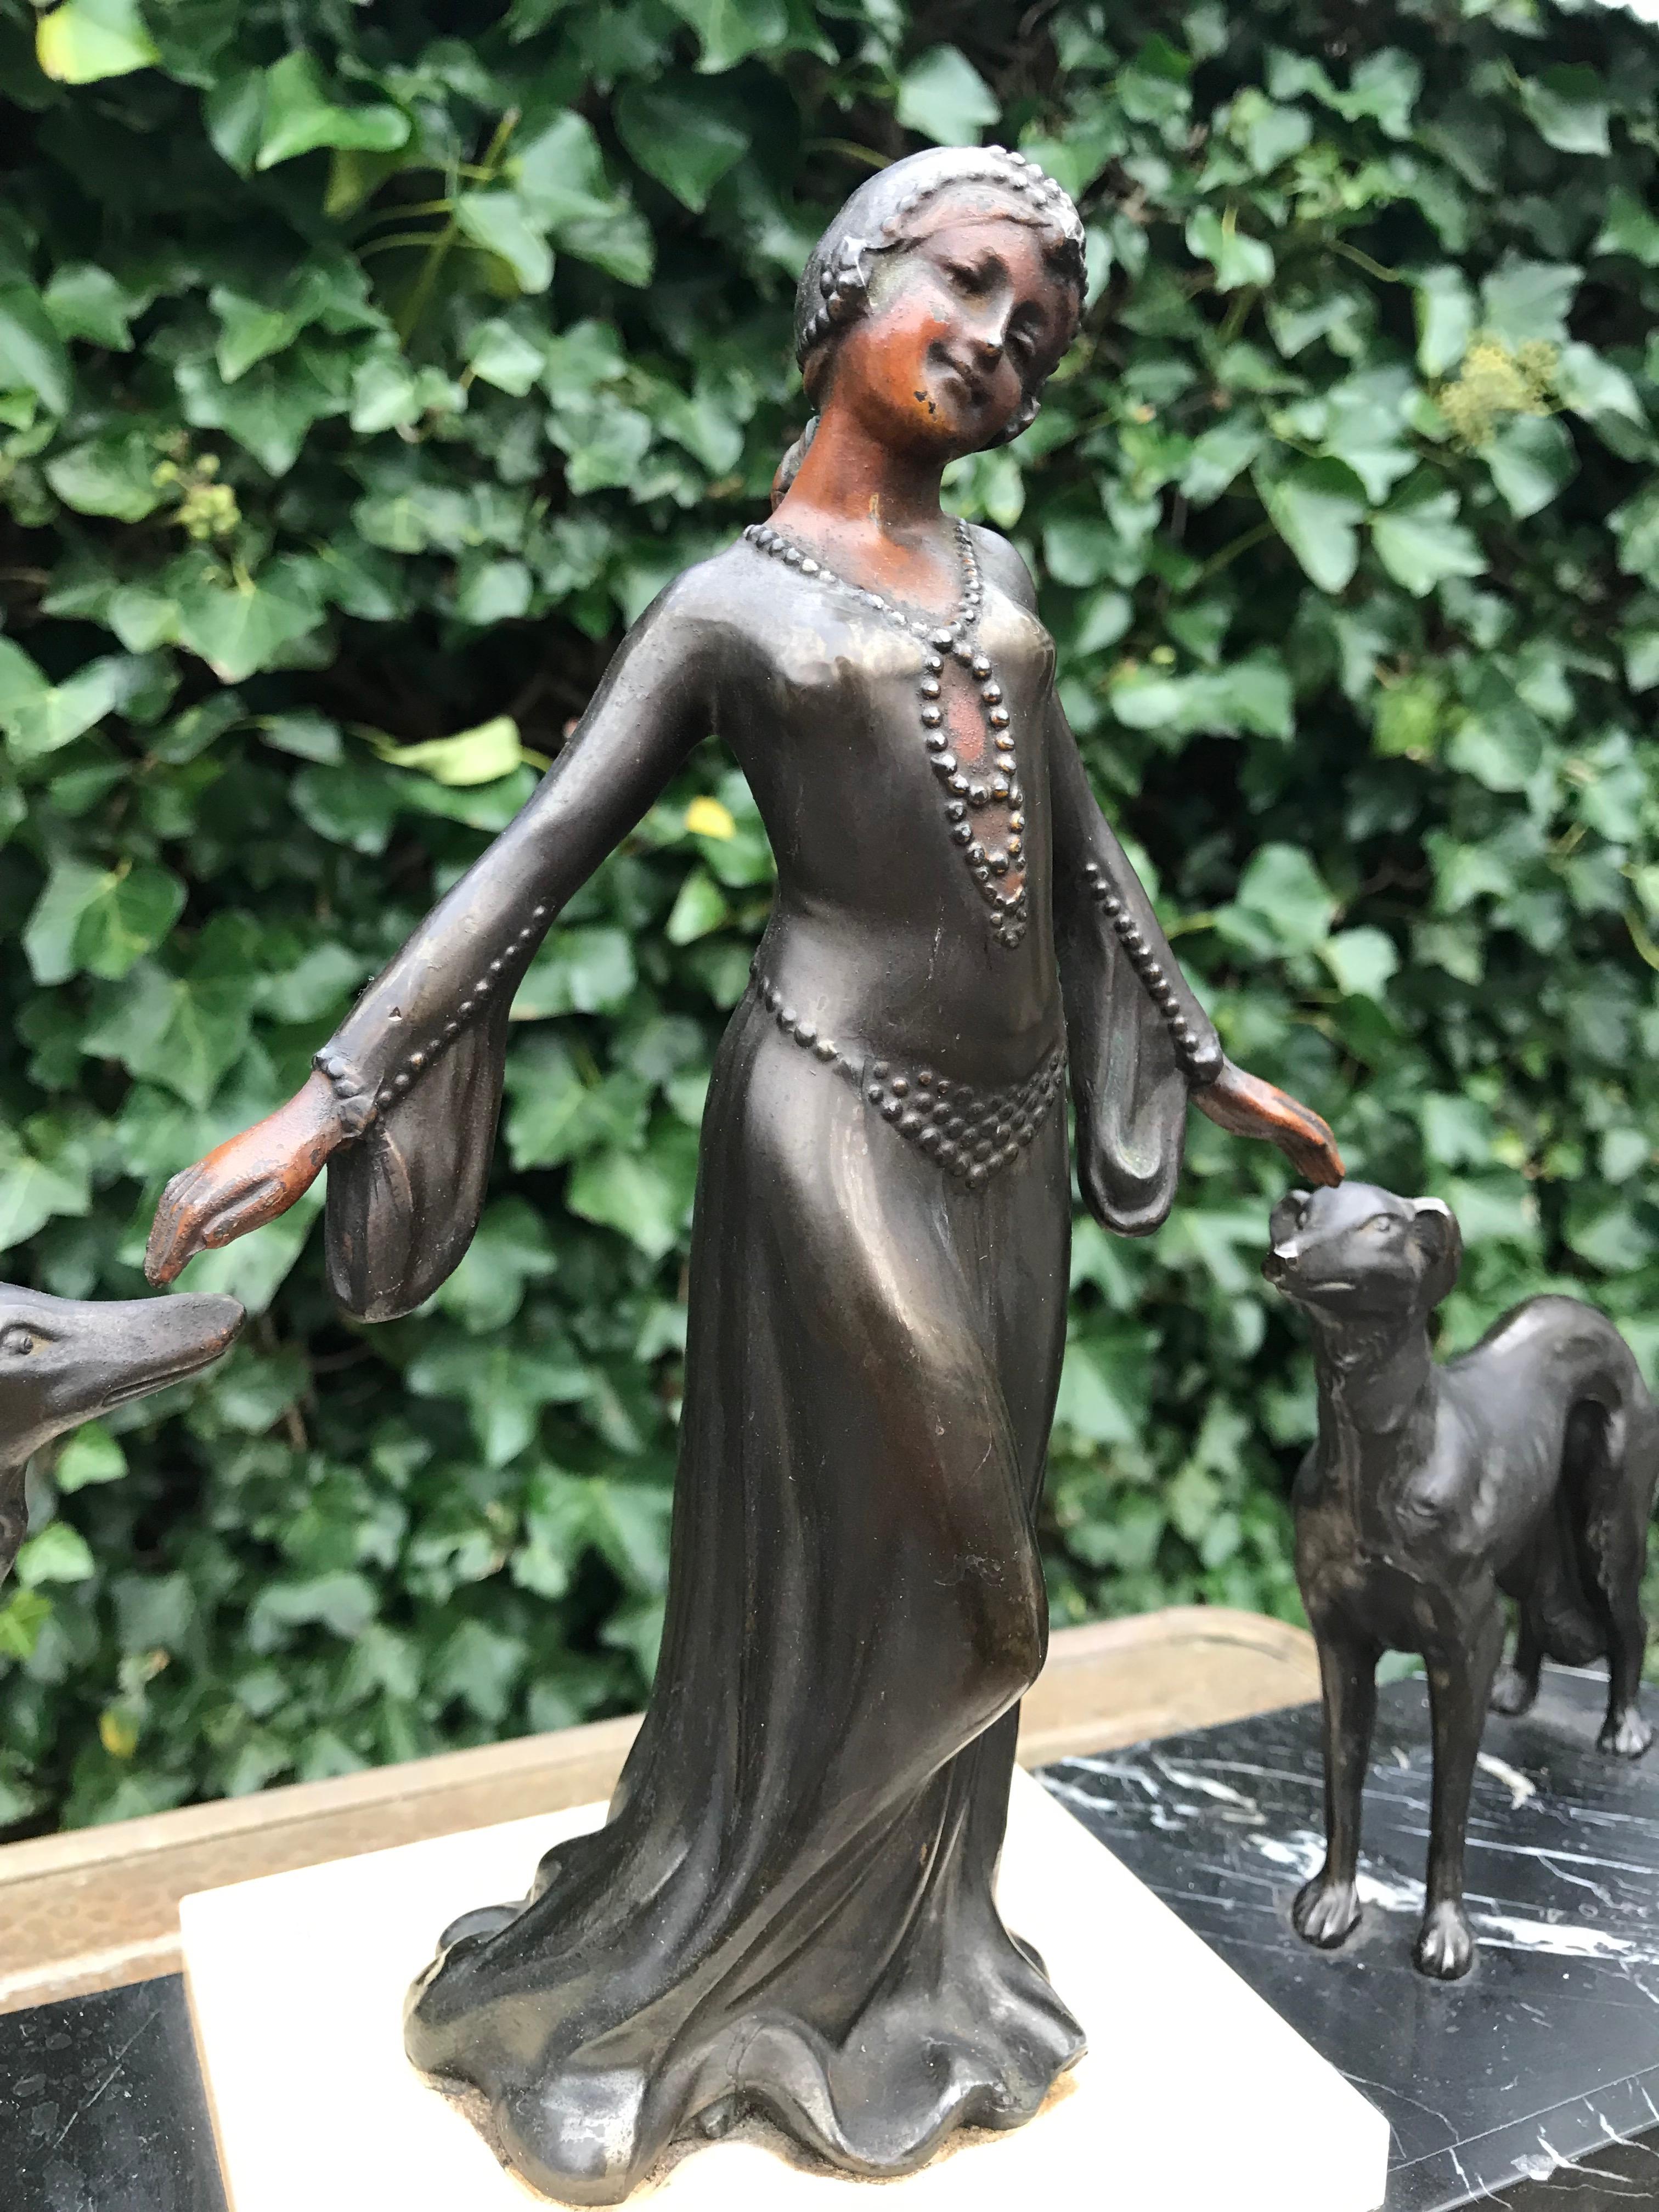 Wonderful work of art for displaying on a side table, dresser etc.

This Art Deco sculpture embodies everything we love about art and antiques. The beautiful and realistic, young female in her 1920s dress and hairdo is a work of art (deco) by